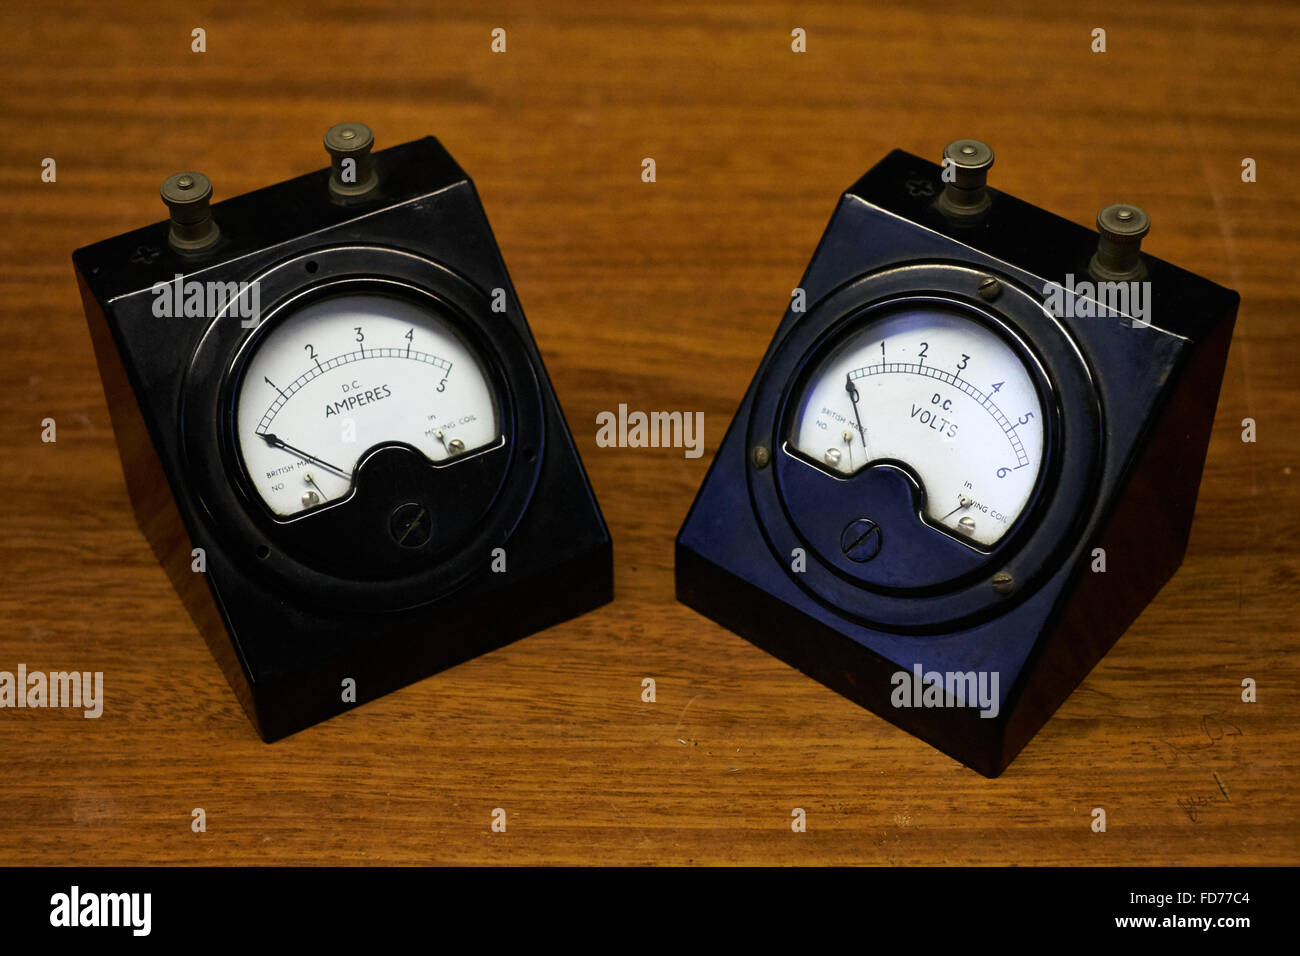 A pair of vintage electrical meters. An ammeter and a voltmeter. Stock Photo